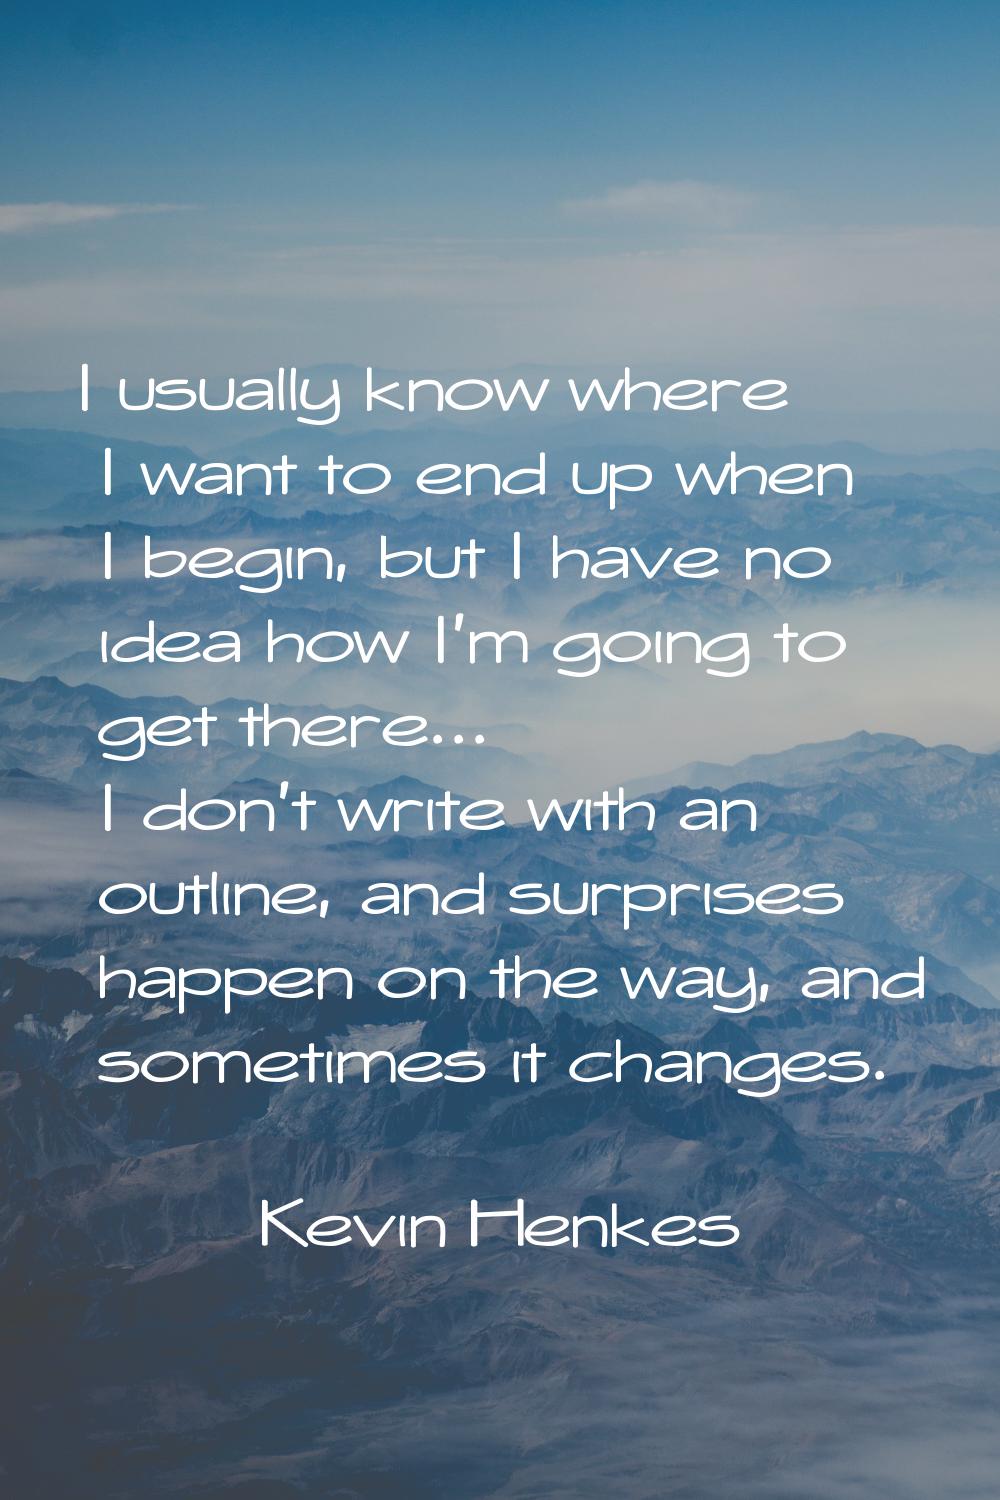 I usually know where I want to end up when I begin, but I have no idea how I'm going to get there..